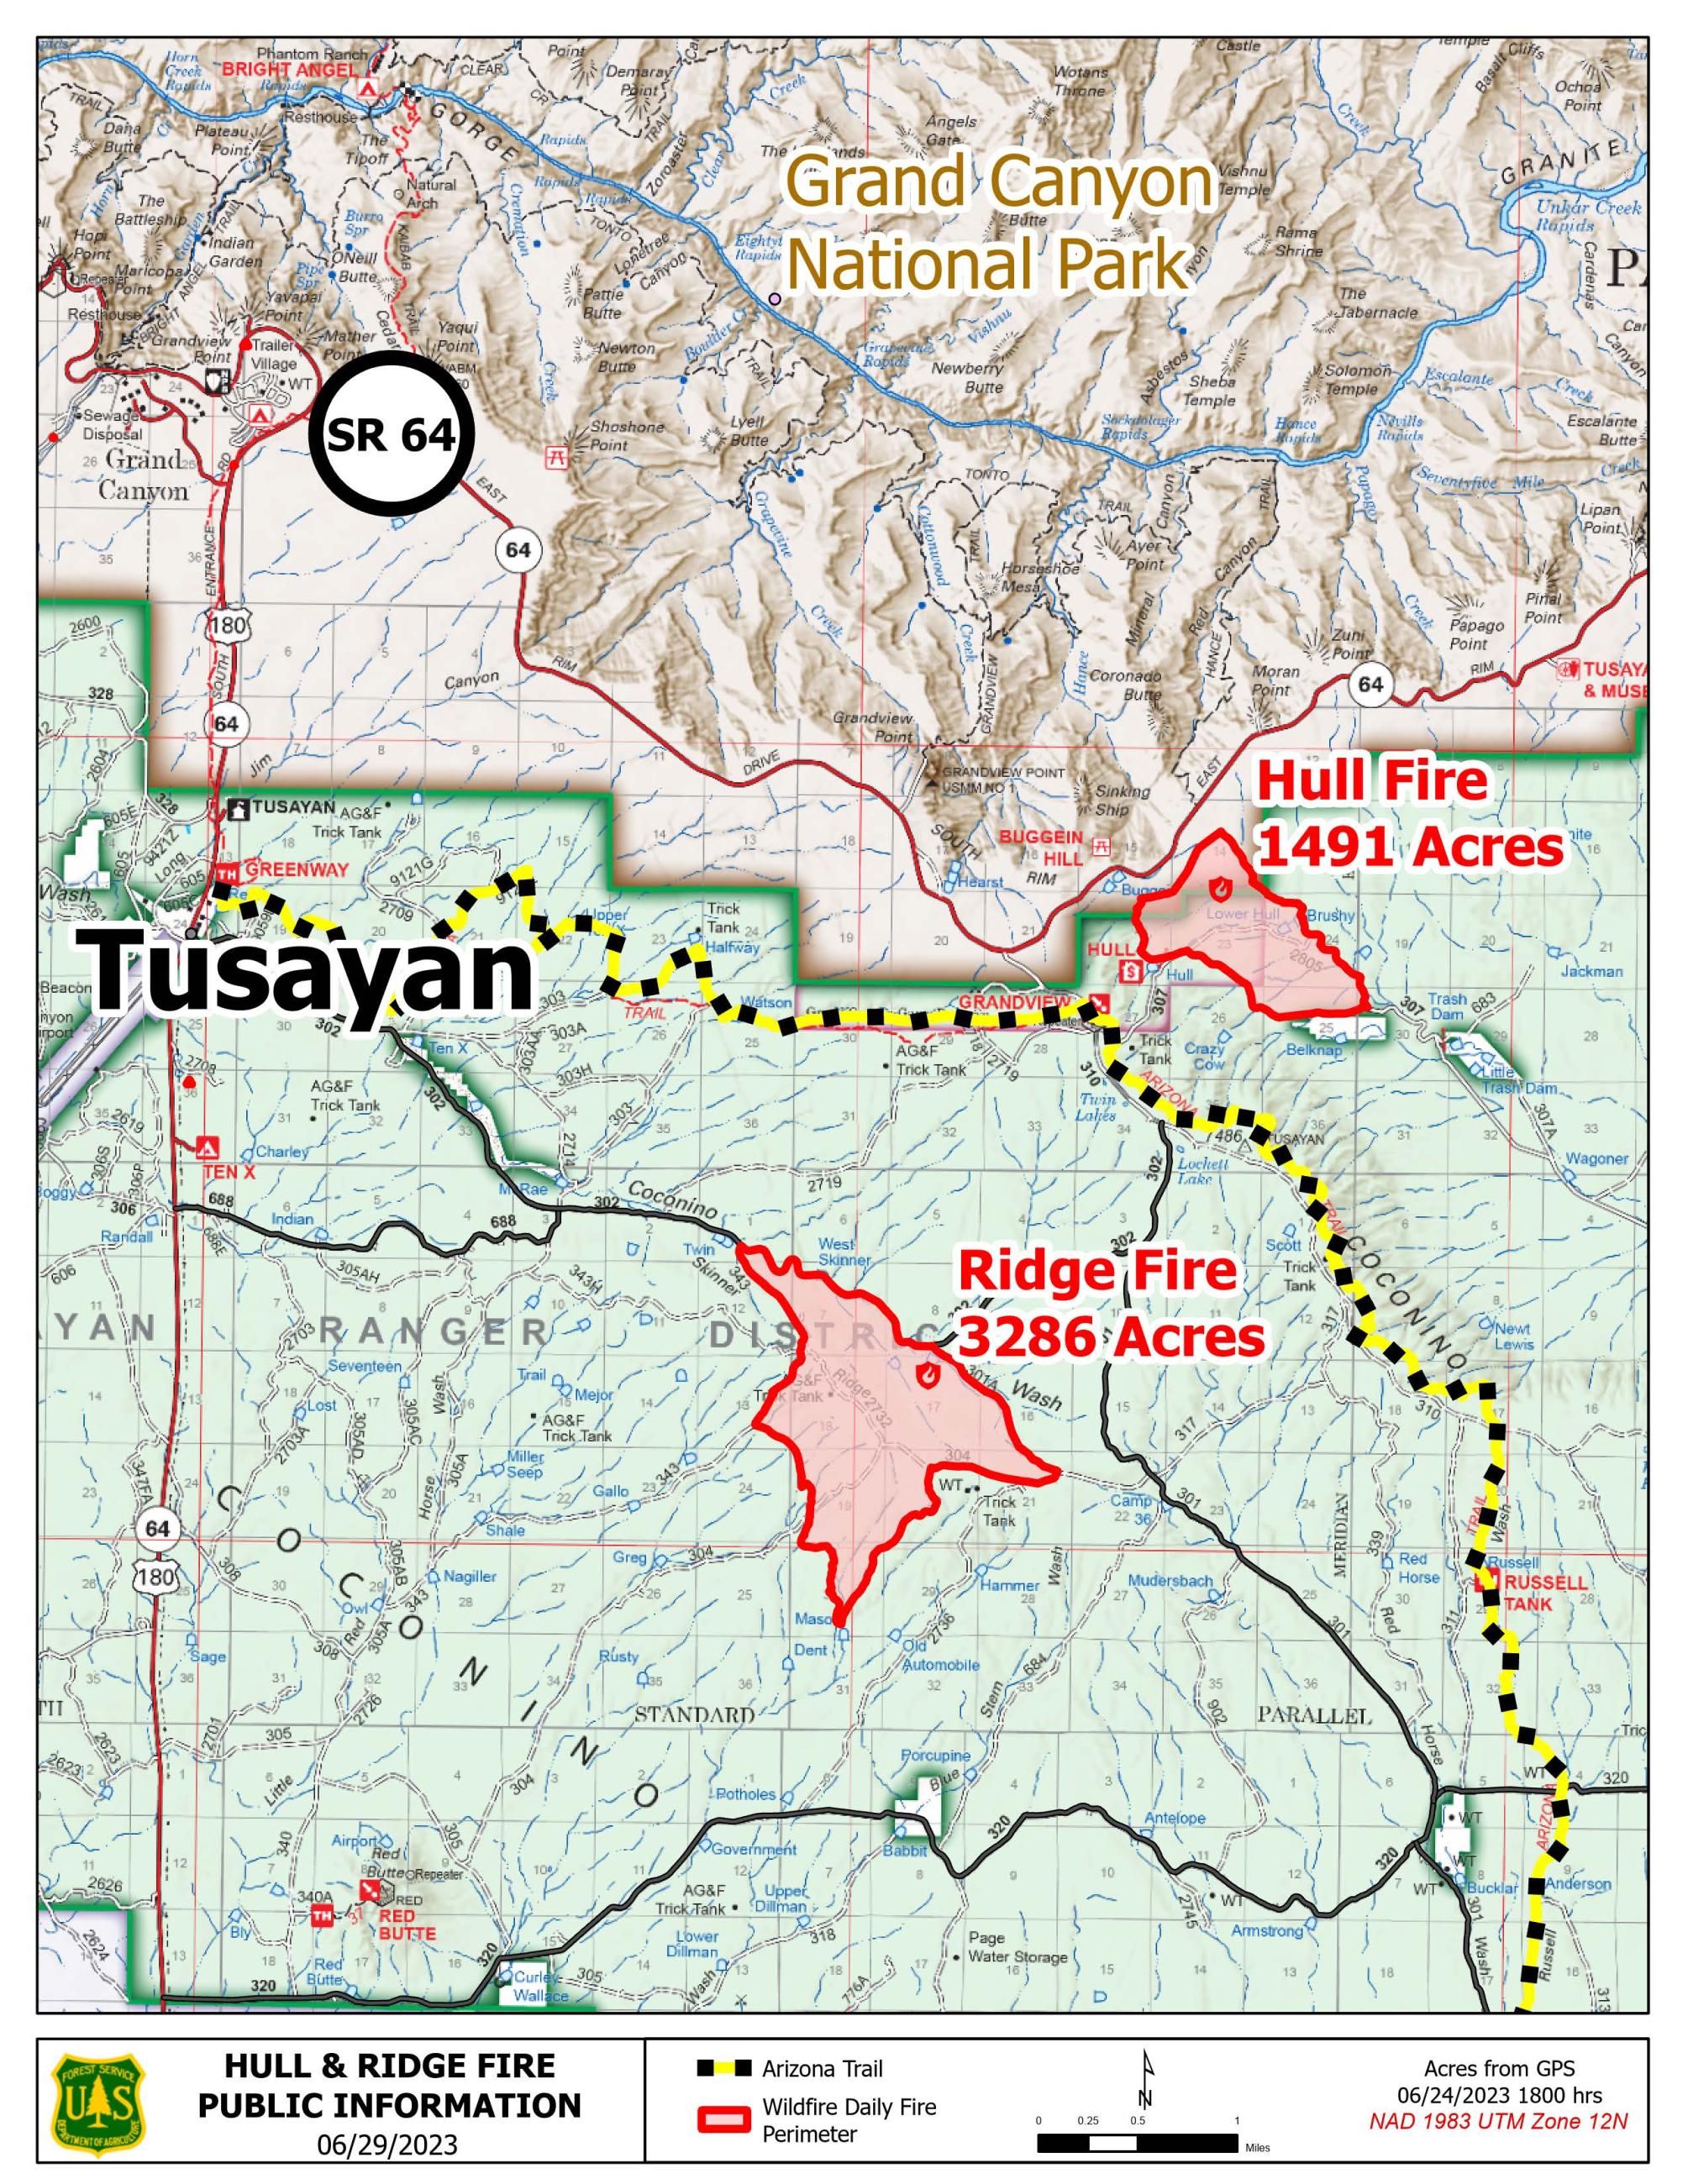 Hull and Ridge fires map